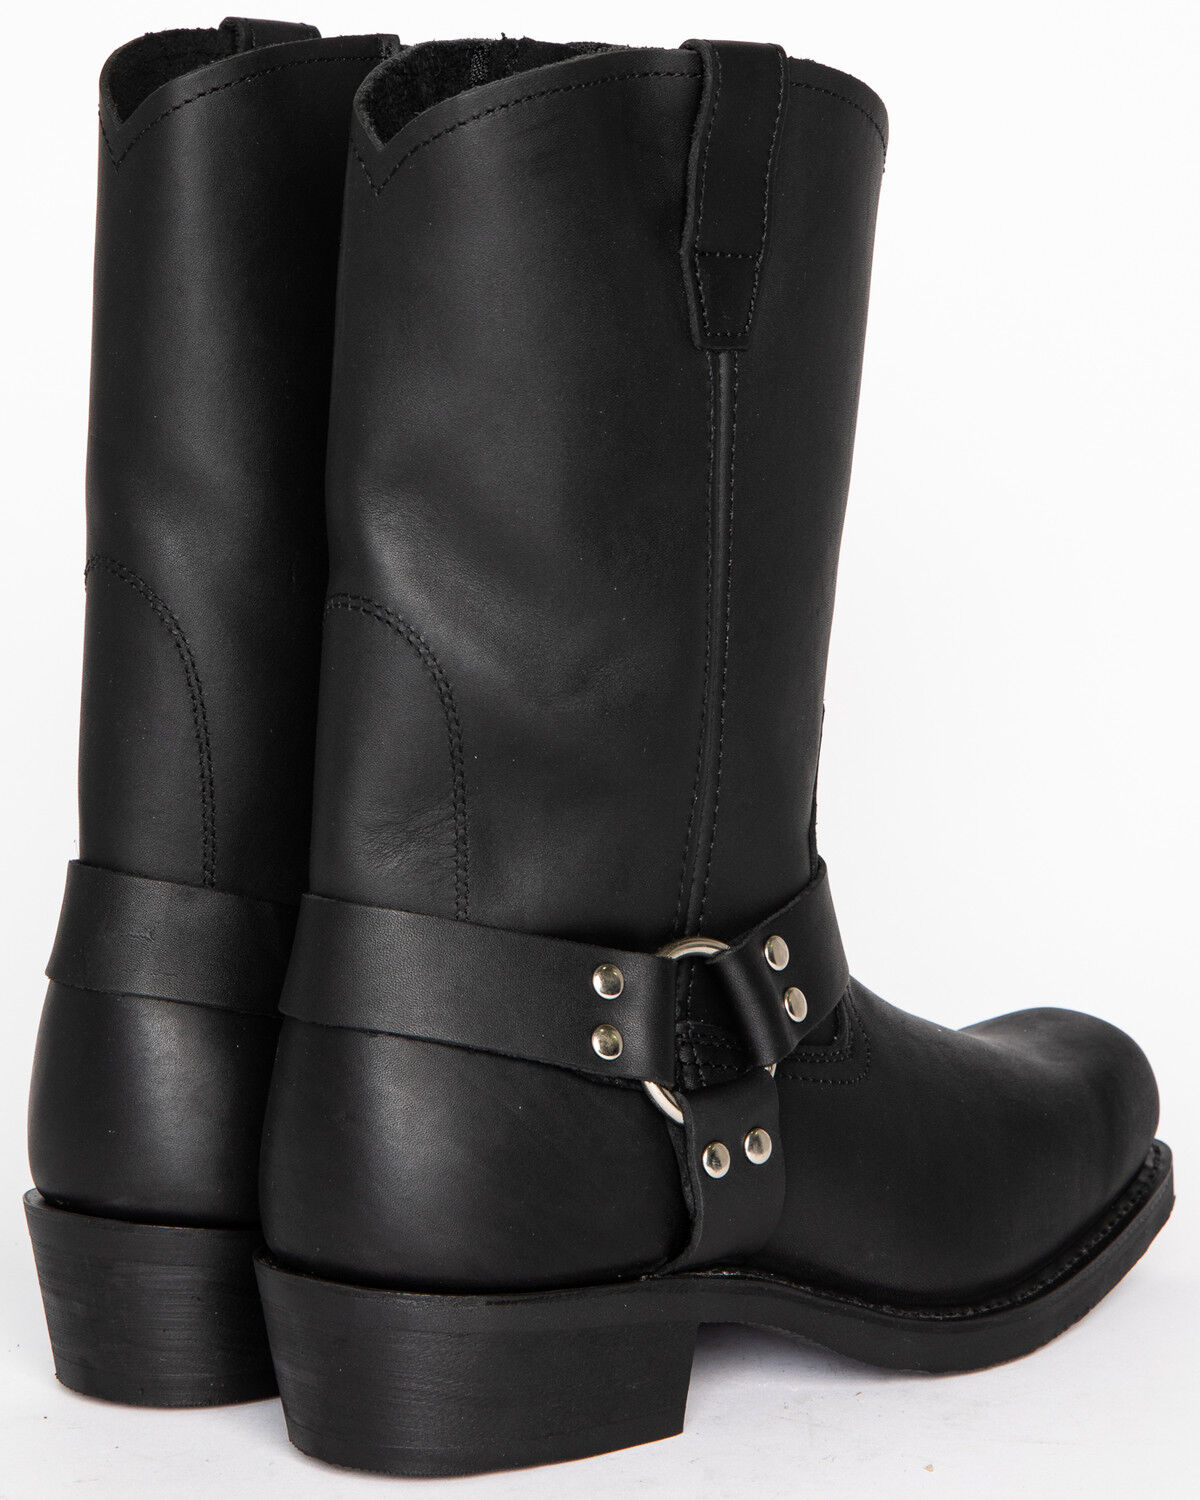 riding boots with zipper